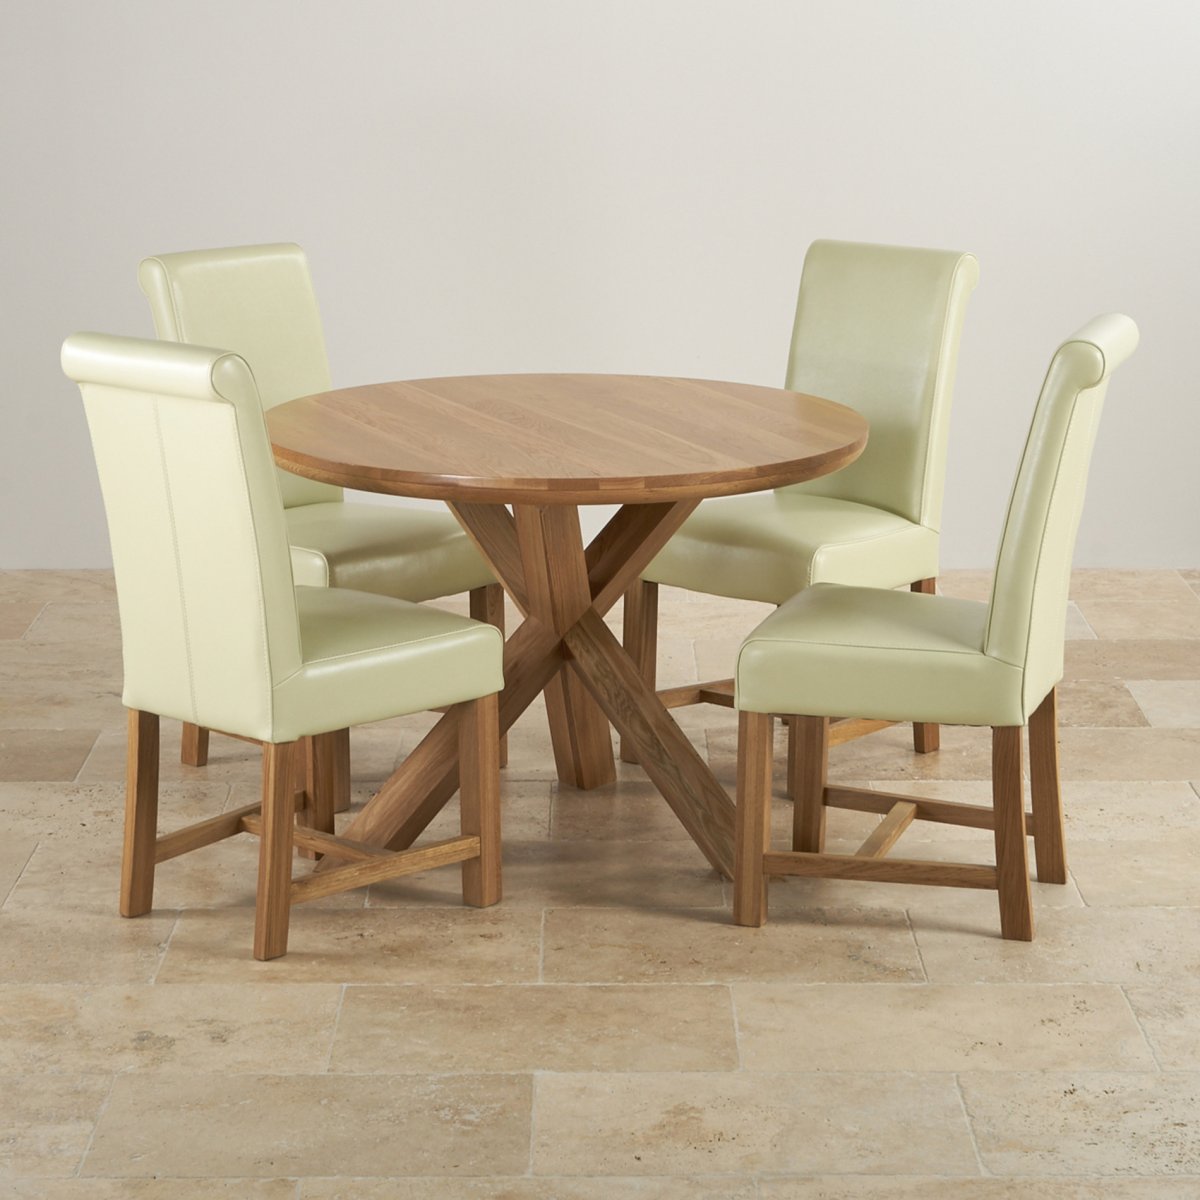 Natural Oak Round Dining Set: Table + 4 Cream Leather Chairs